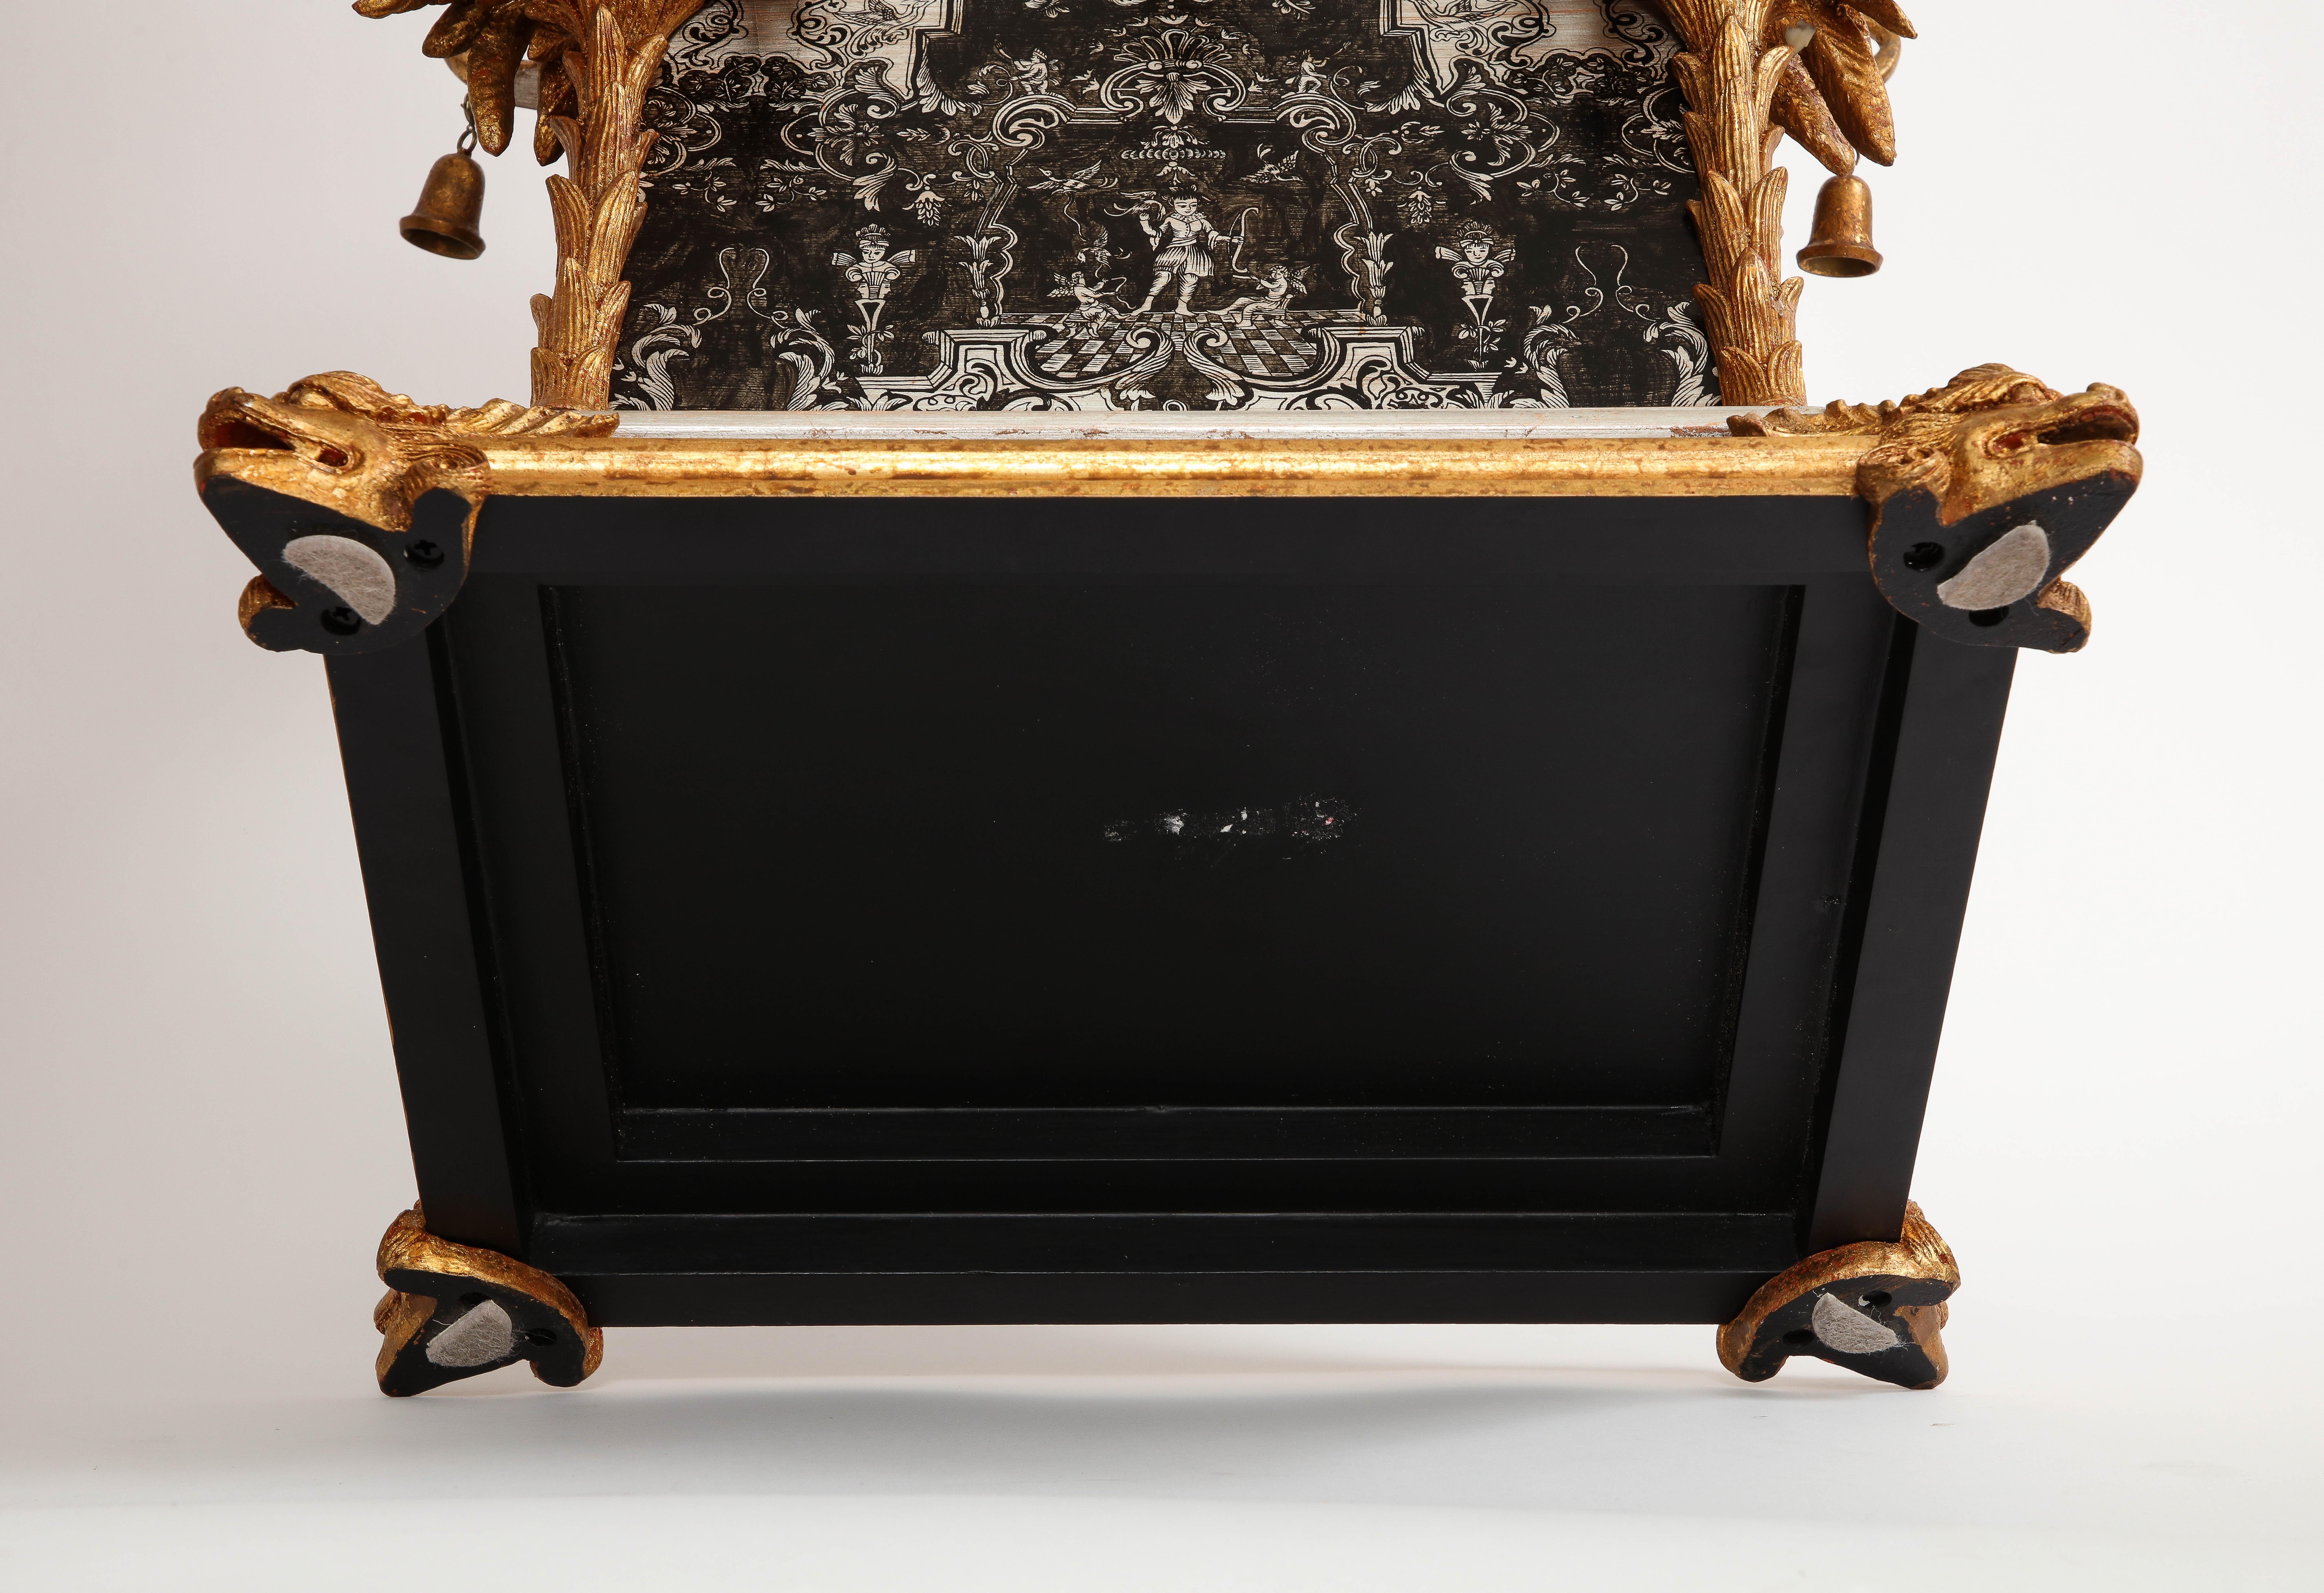 A 1930's French Gilt Lacquered Wood Pagoda Form Chinoiserie Platinum Painted Box For Sale 12